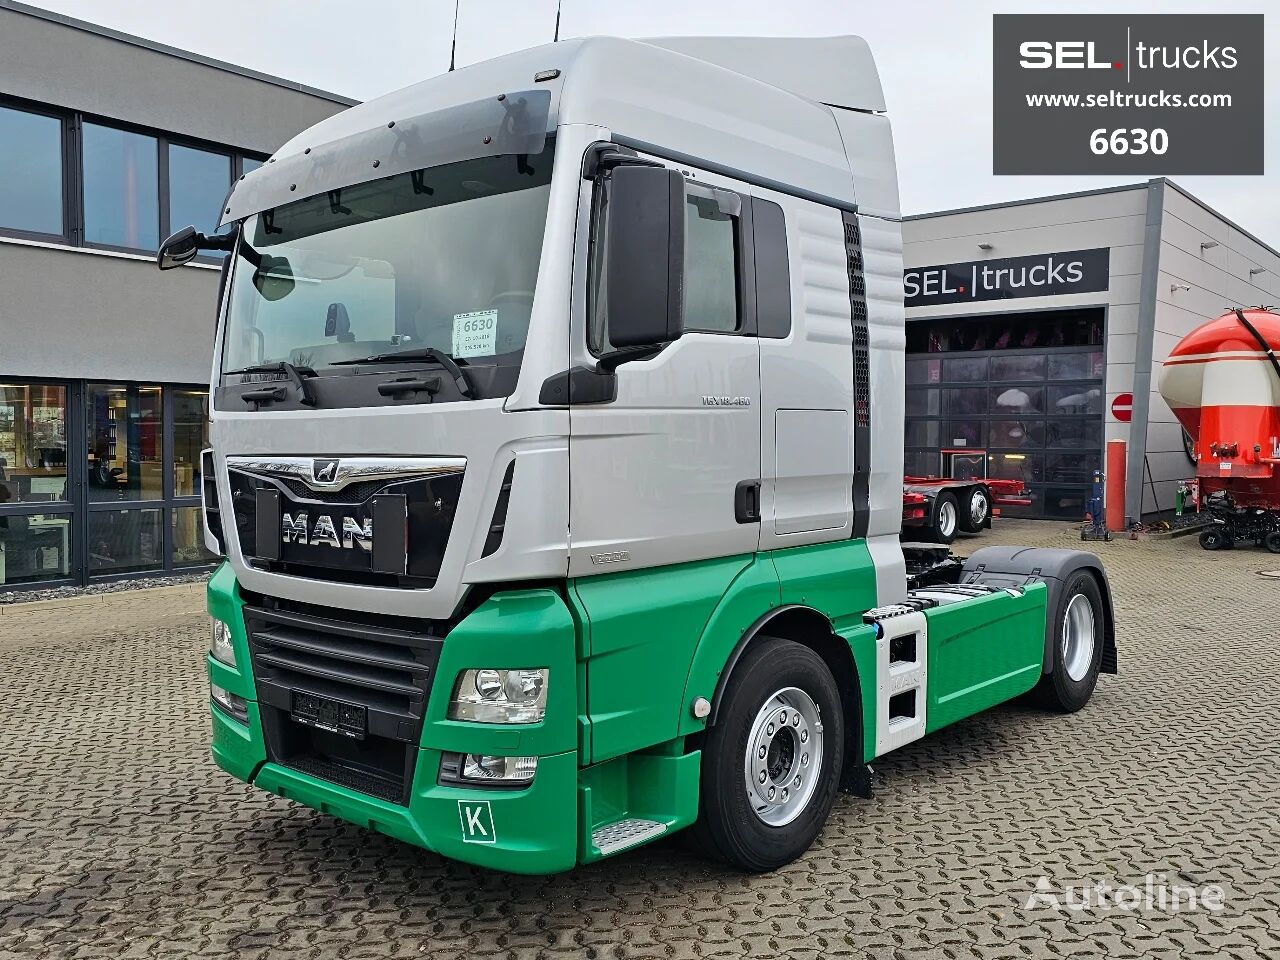 Man Tgx 18460 4x2 Bls Zf Intarder 2 Tanks Adr At Xenon Truck Tractor For Sale Germany 4493